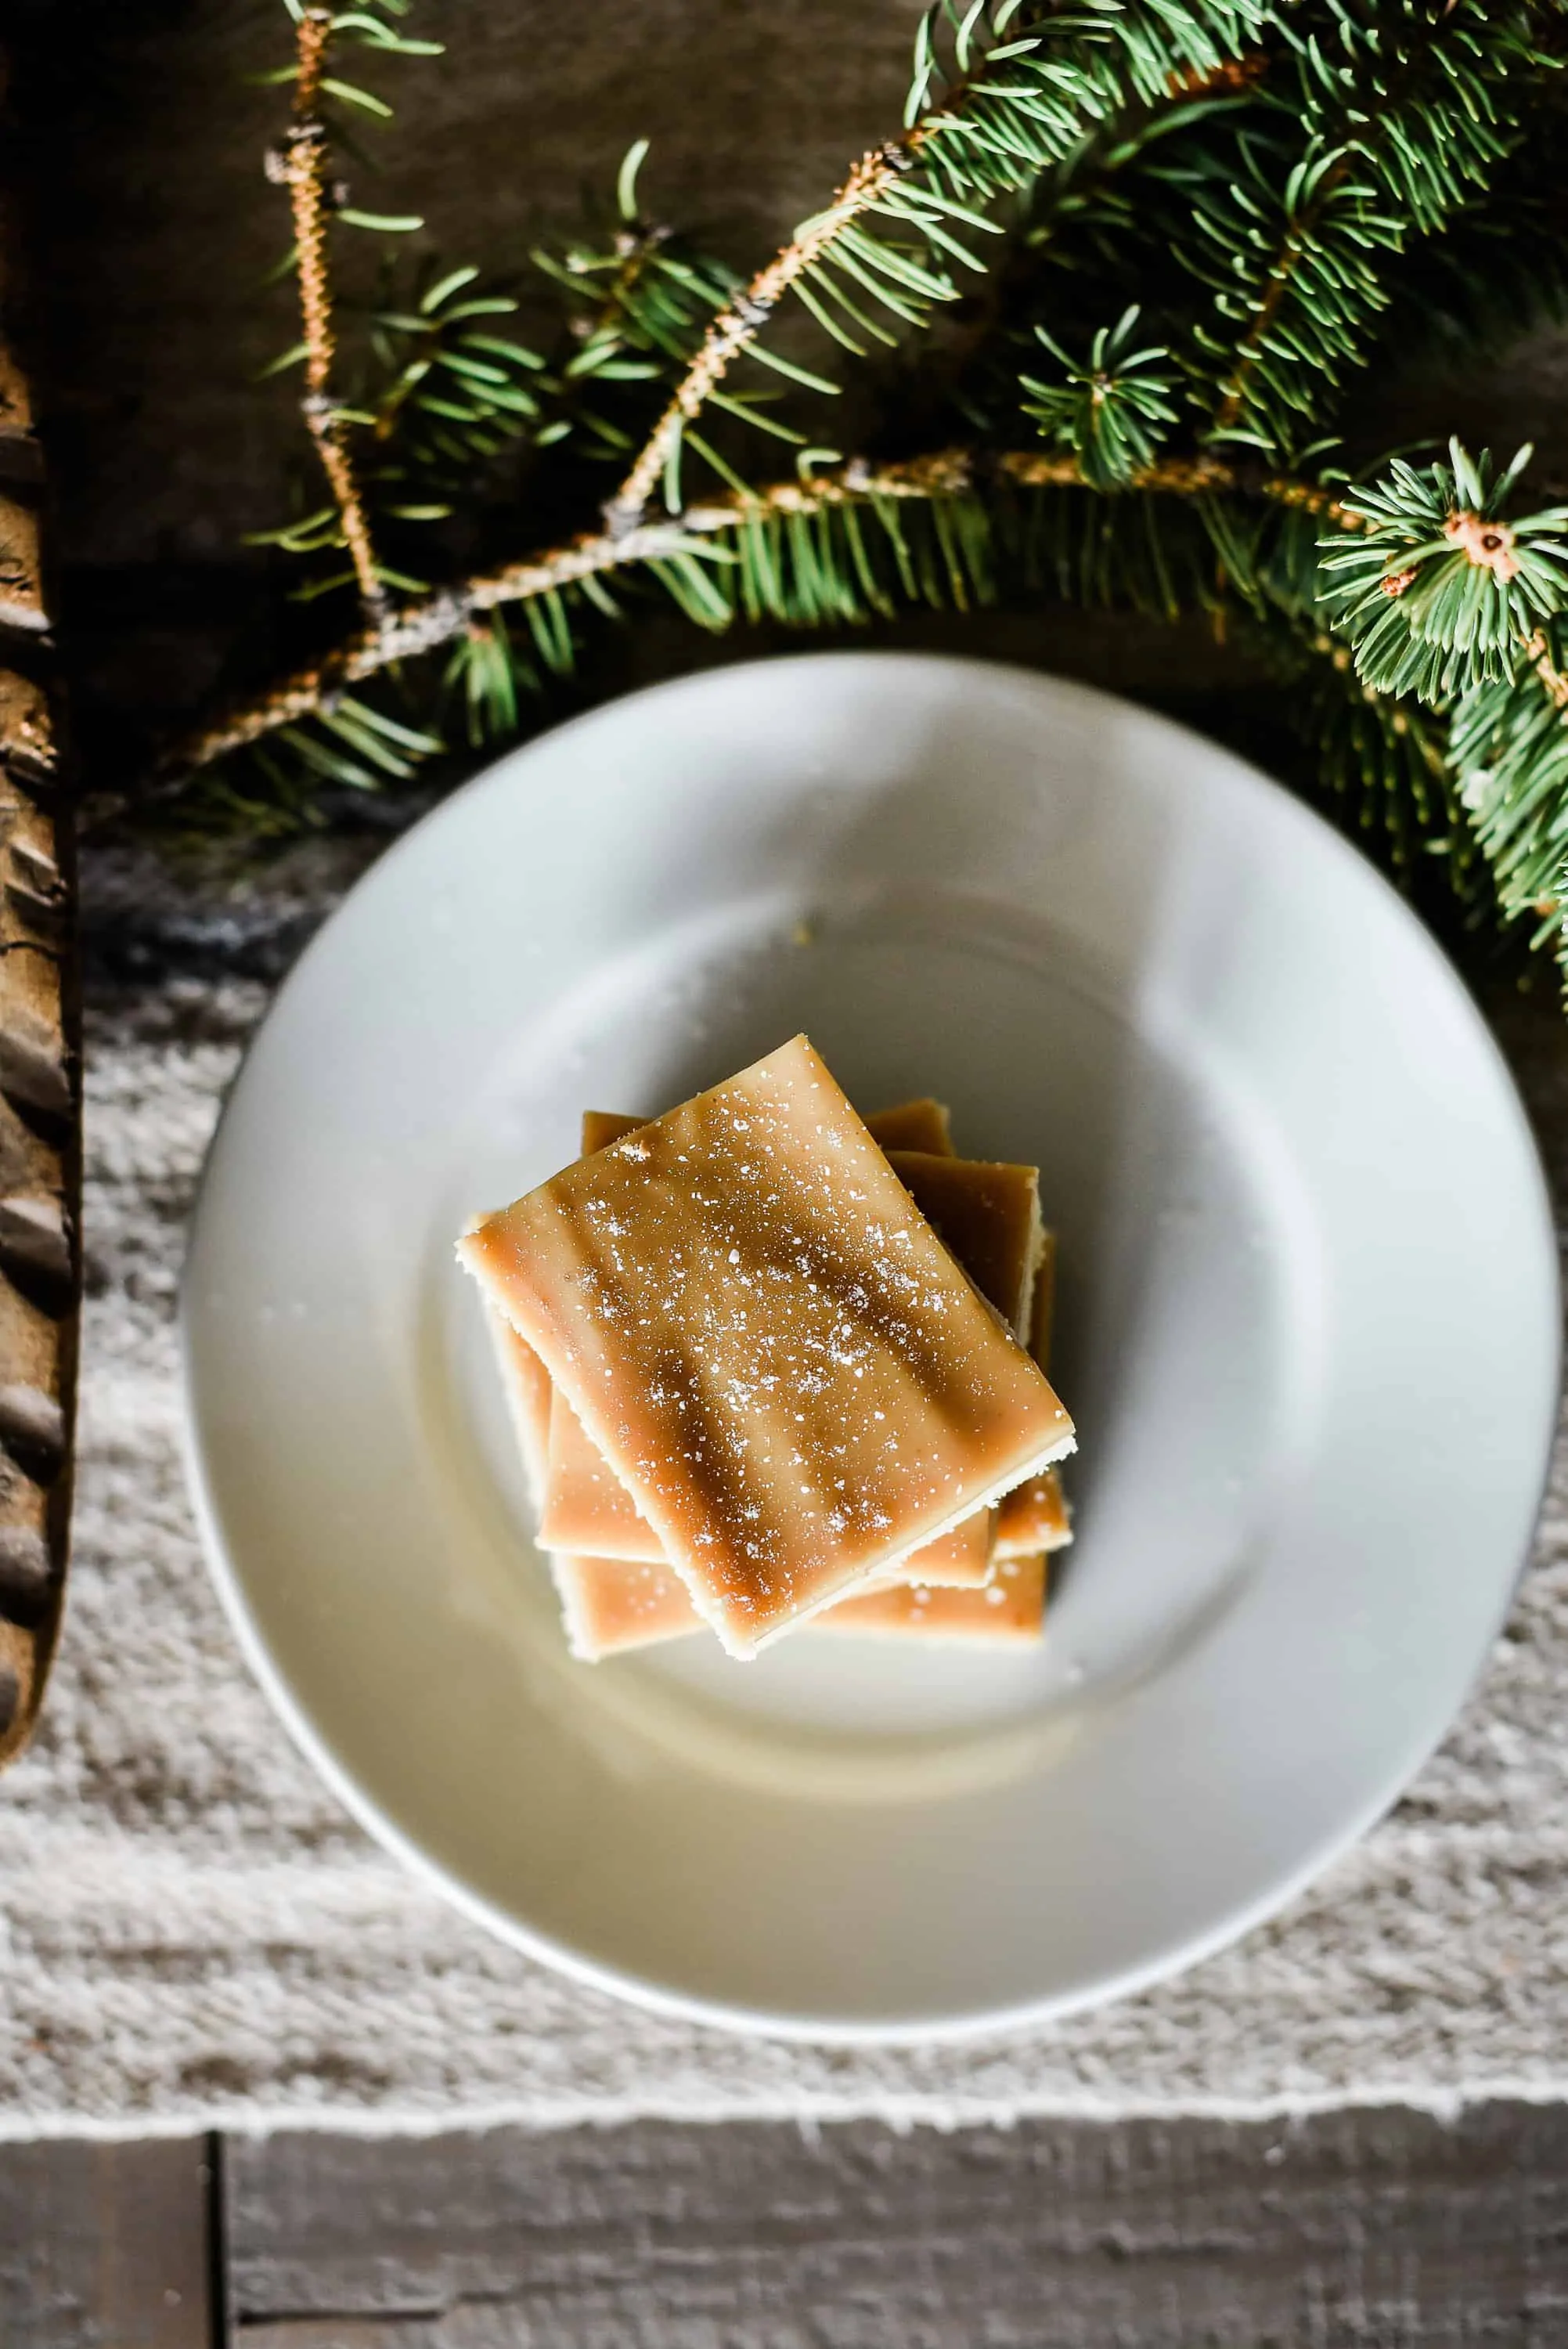 Need some new Christmas cookie recipes this year? Try one of these great recipes! Featuring salted caramel shortbread bars (that are dangerously delicious), be prepared for them to become a house favorite! 